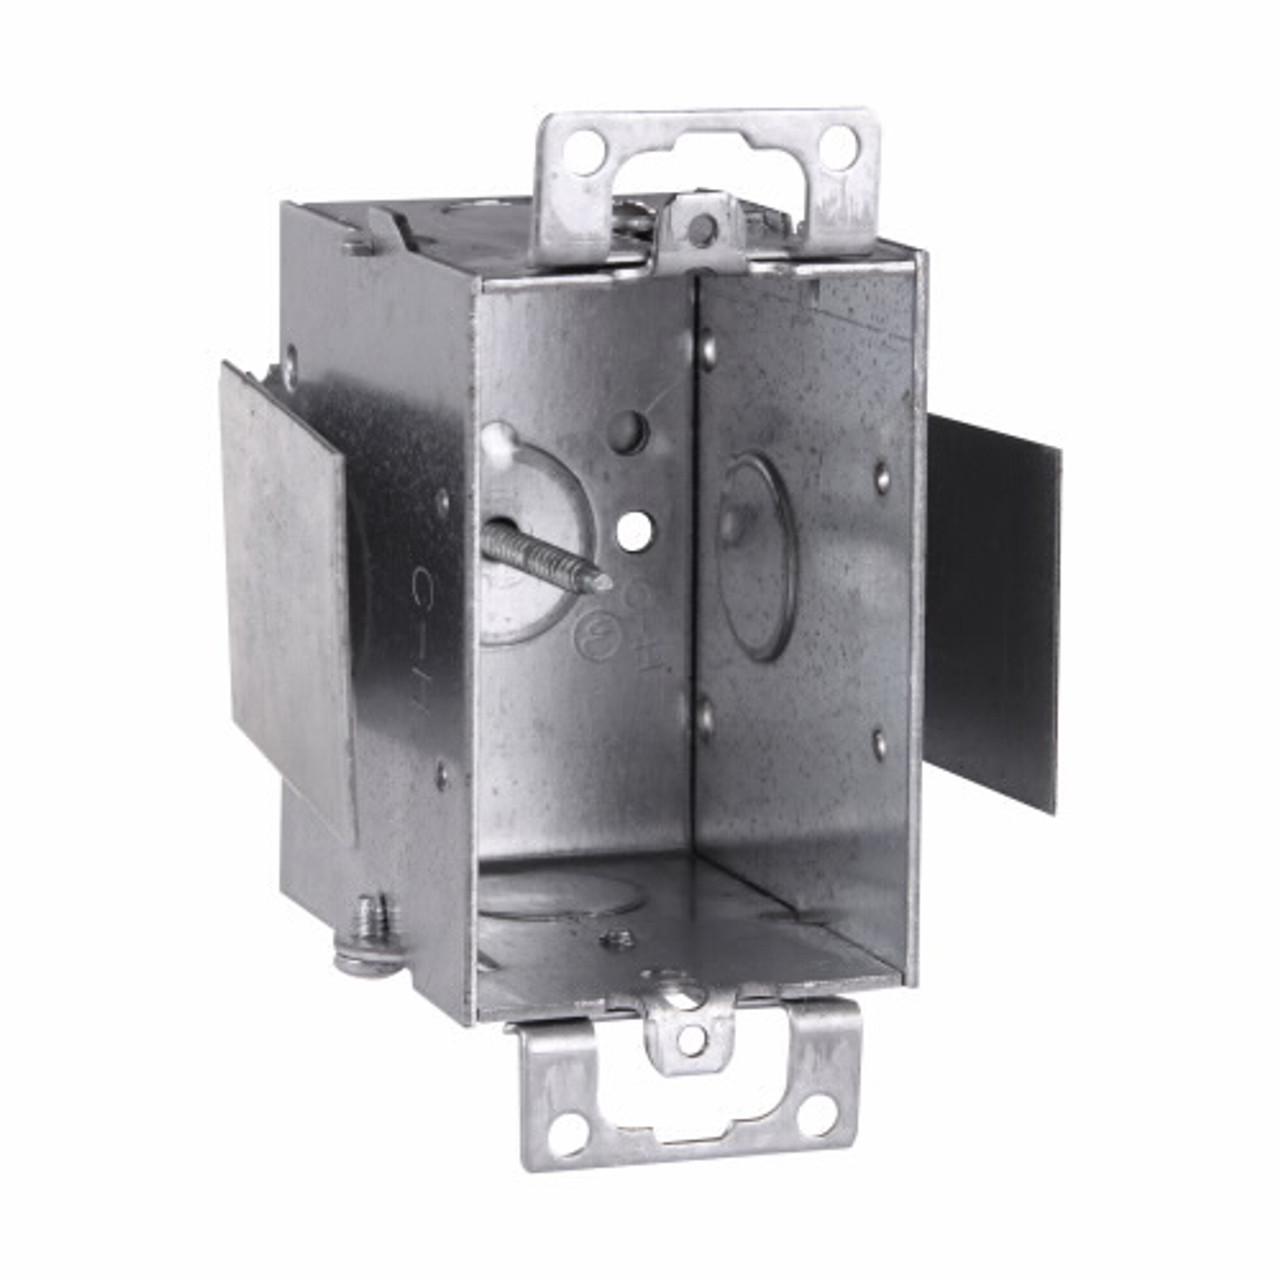 Crouse-Hinds TP216 Gangable Switch Box With Ears and Snap-In Brackets